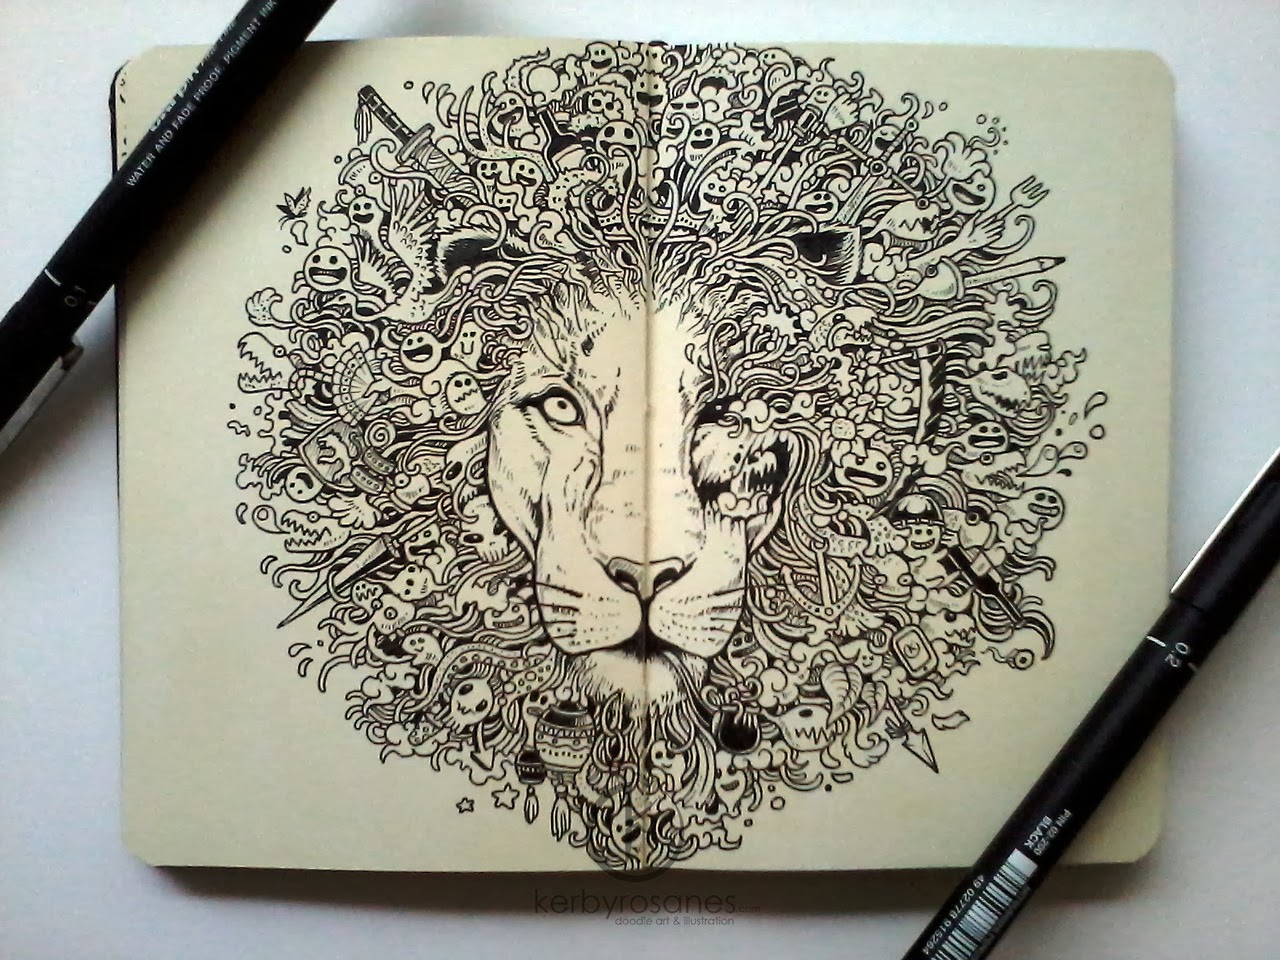 Simply Creative: Doodle Art by Kerby Rosanes